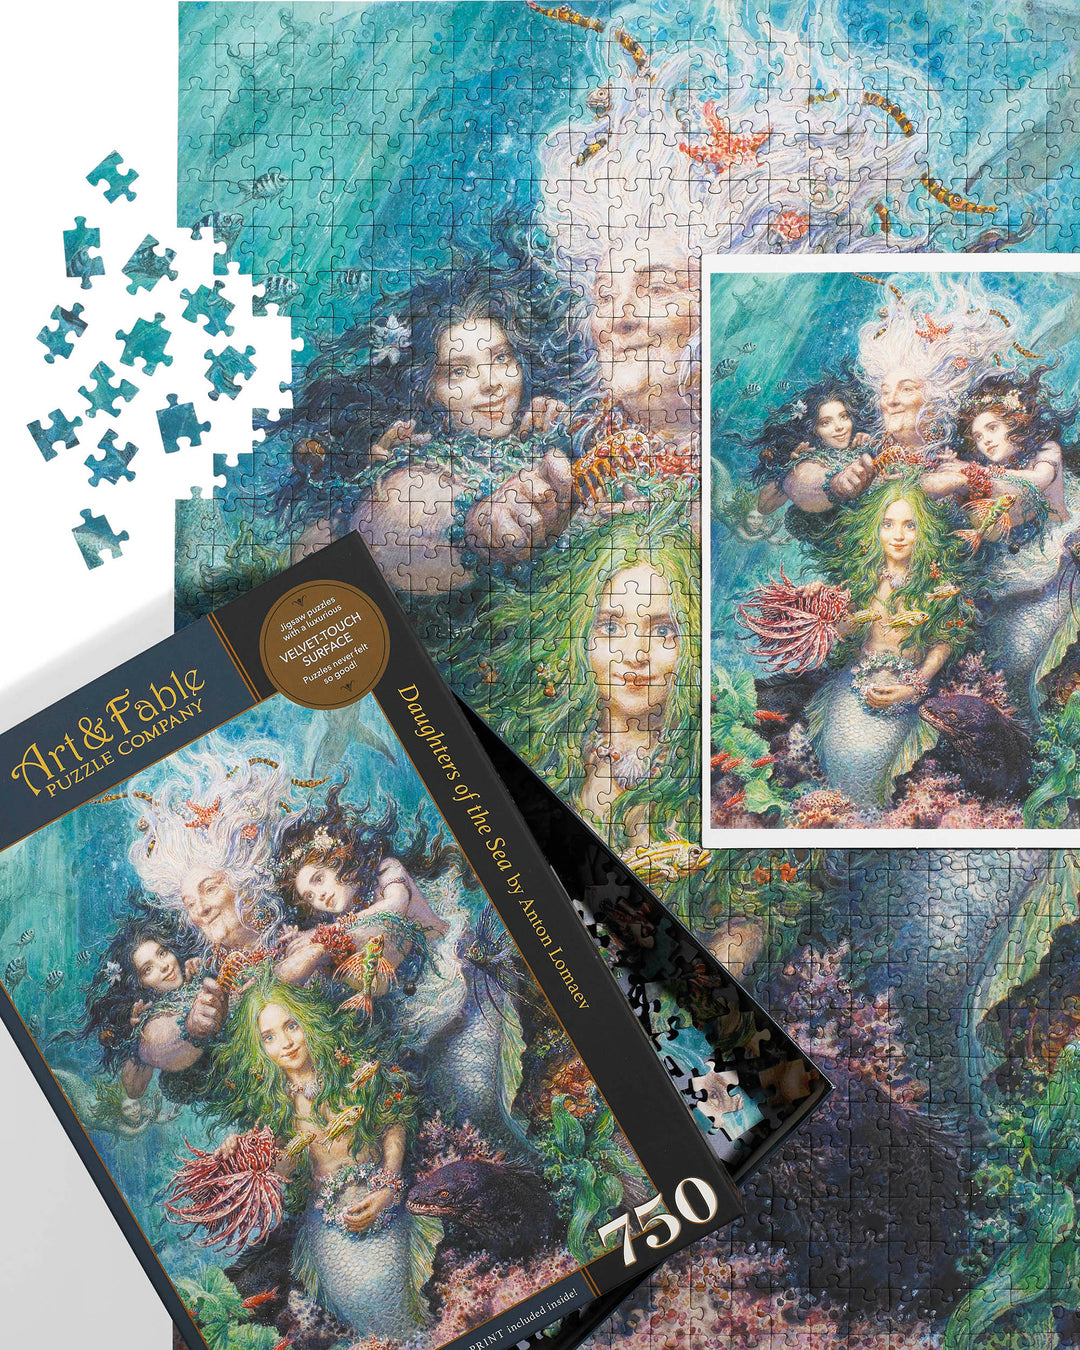 Daughters of the Sea 750pc Puzzle